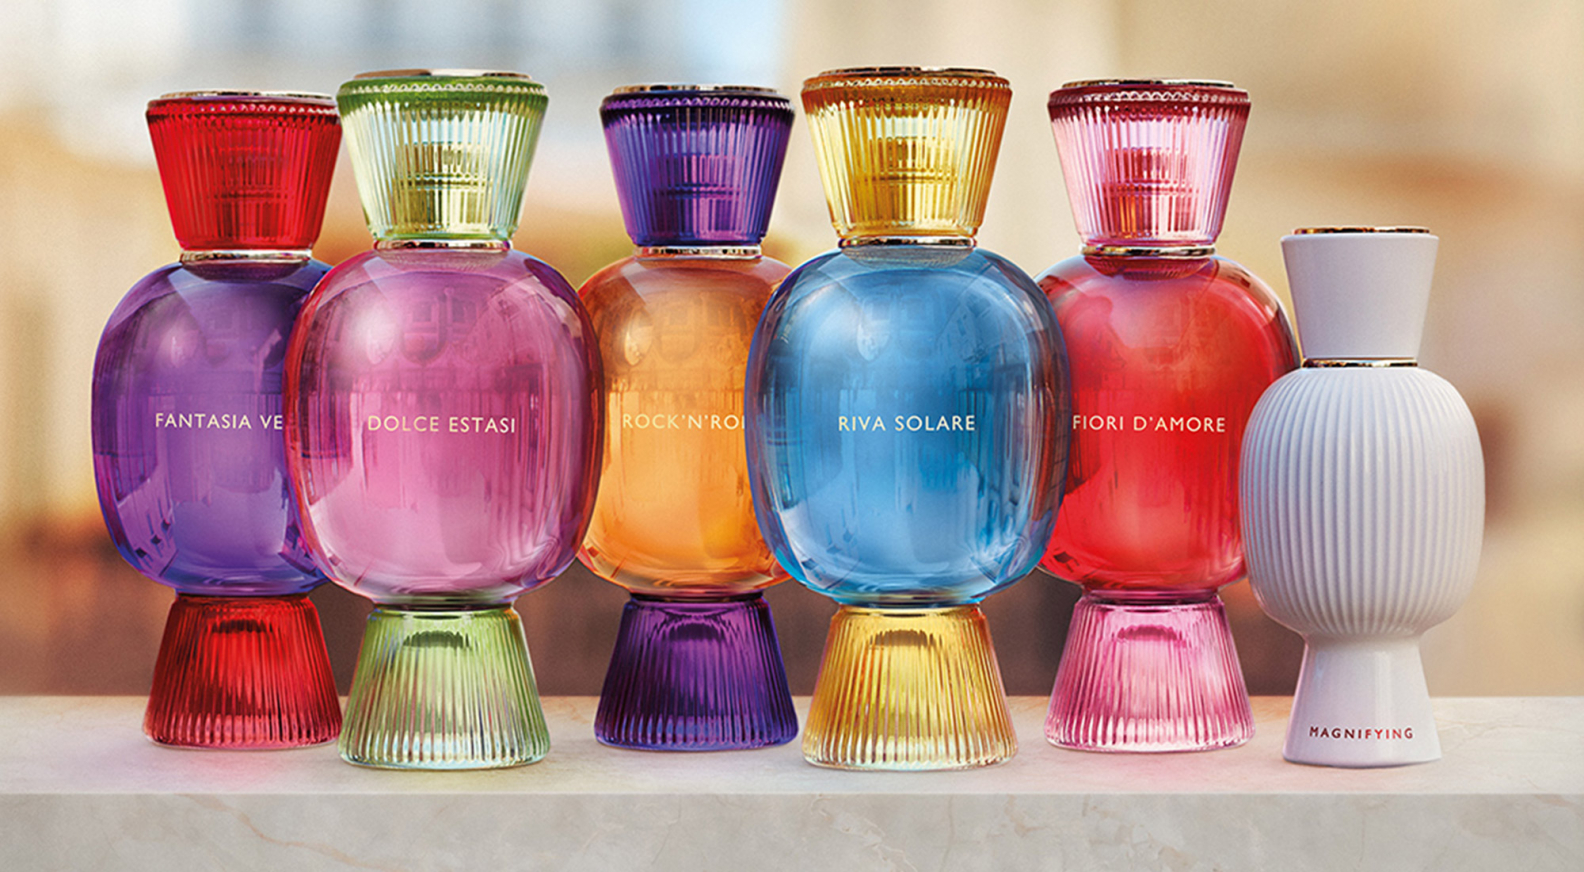 Bvlgari Allegra, the new personalized fragrance experience from Bvlgari